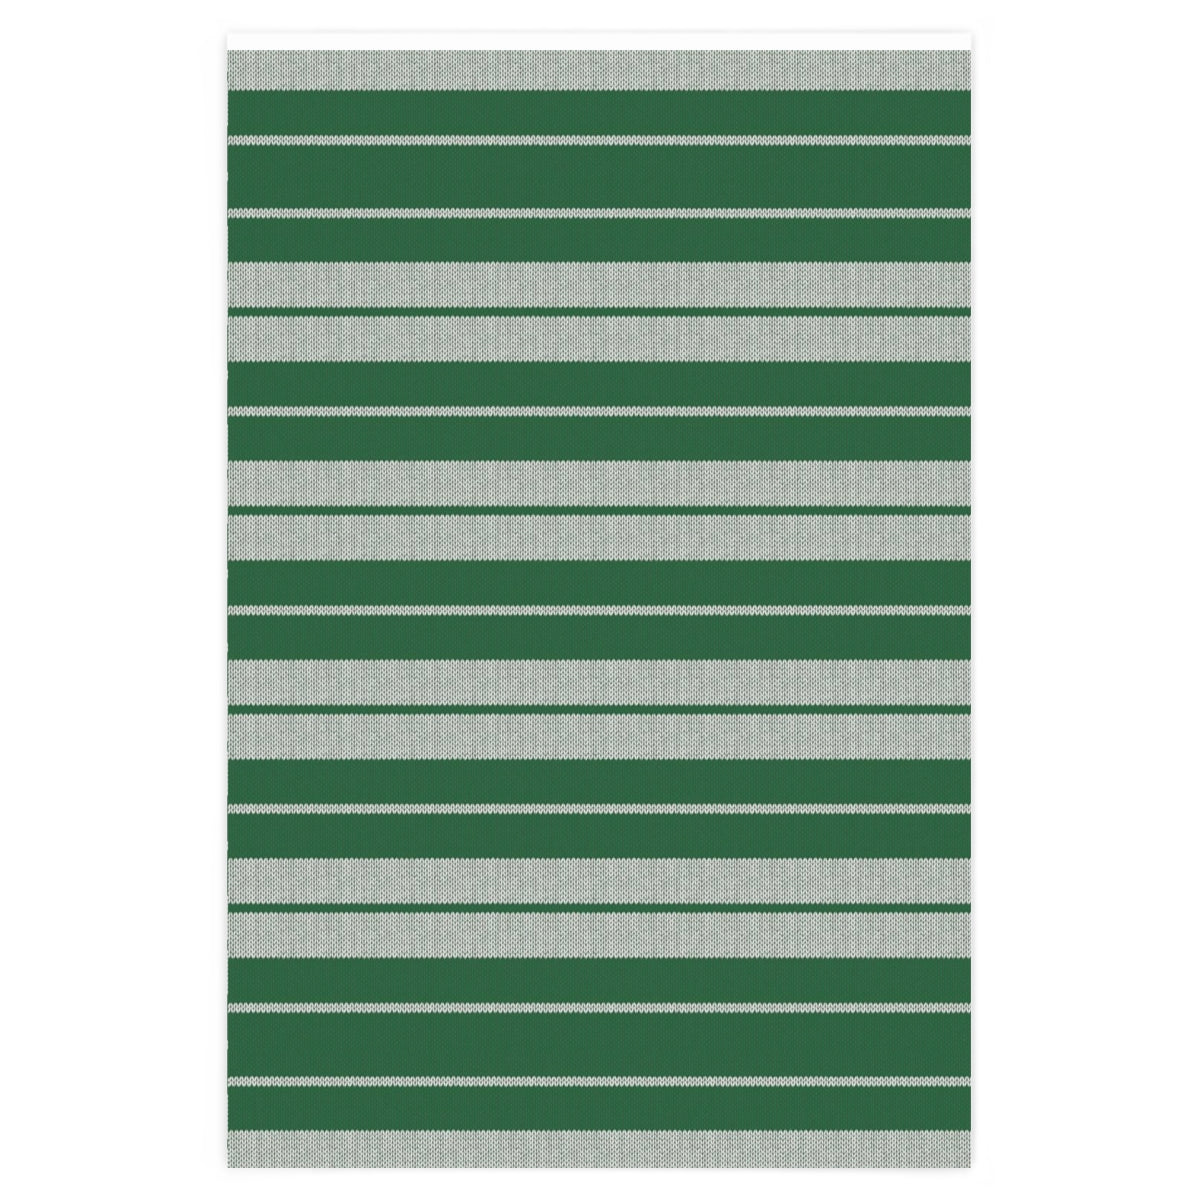 OG Charlie Brown Stripe (Green & White) - Wrapping Paper